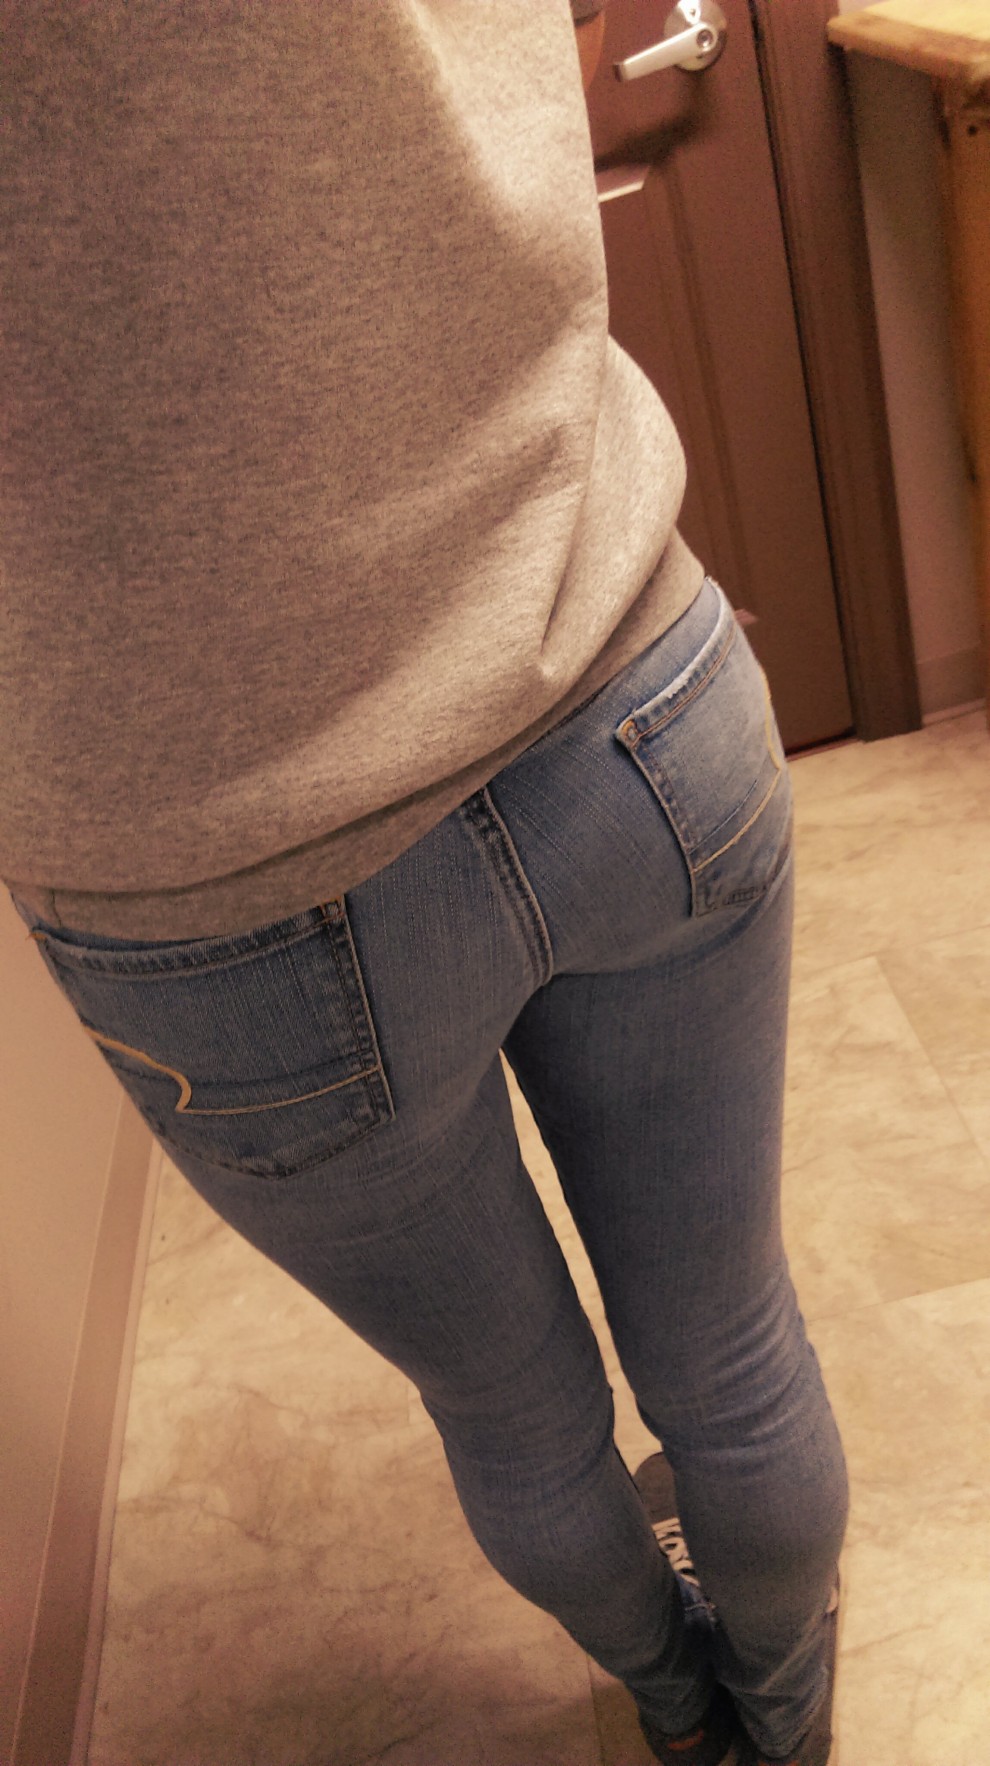 My Booty In My Favorite Tight Jeans!